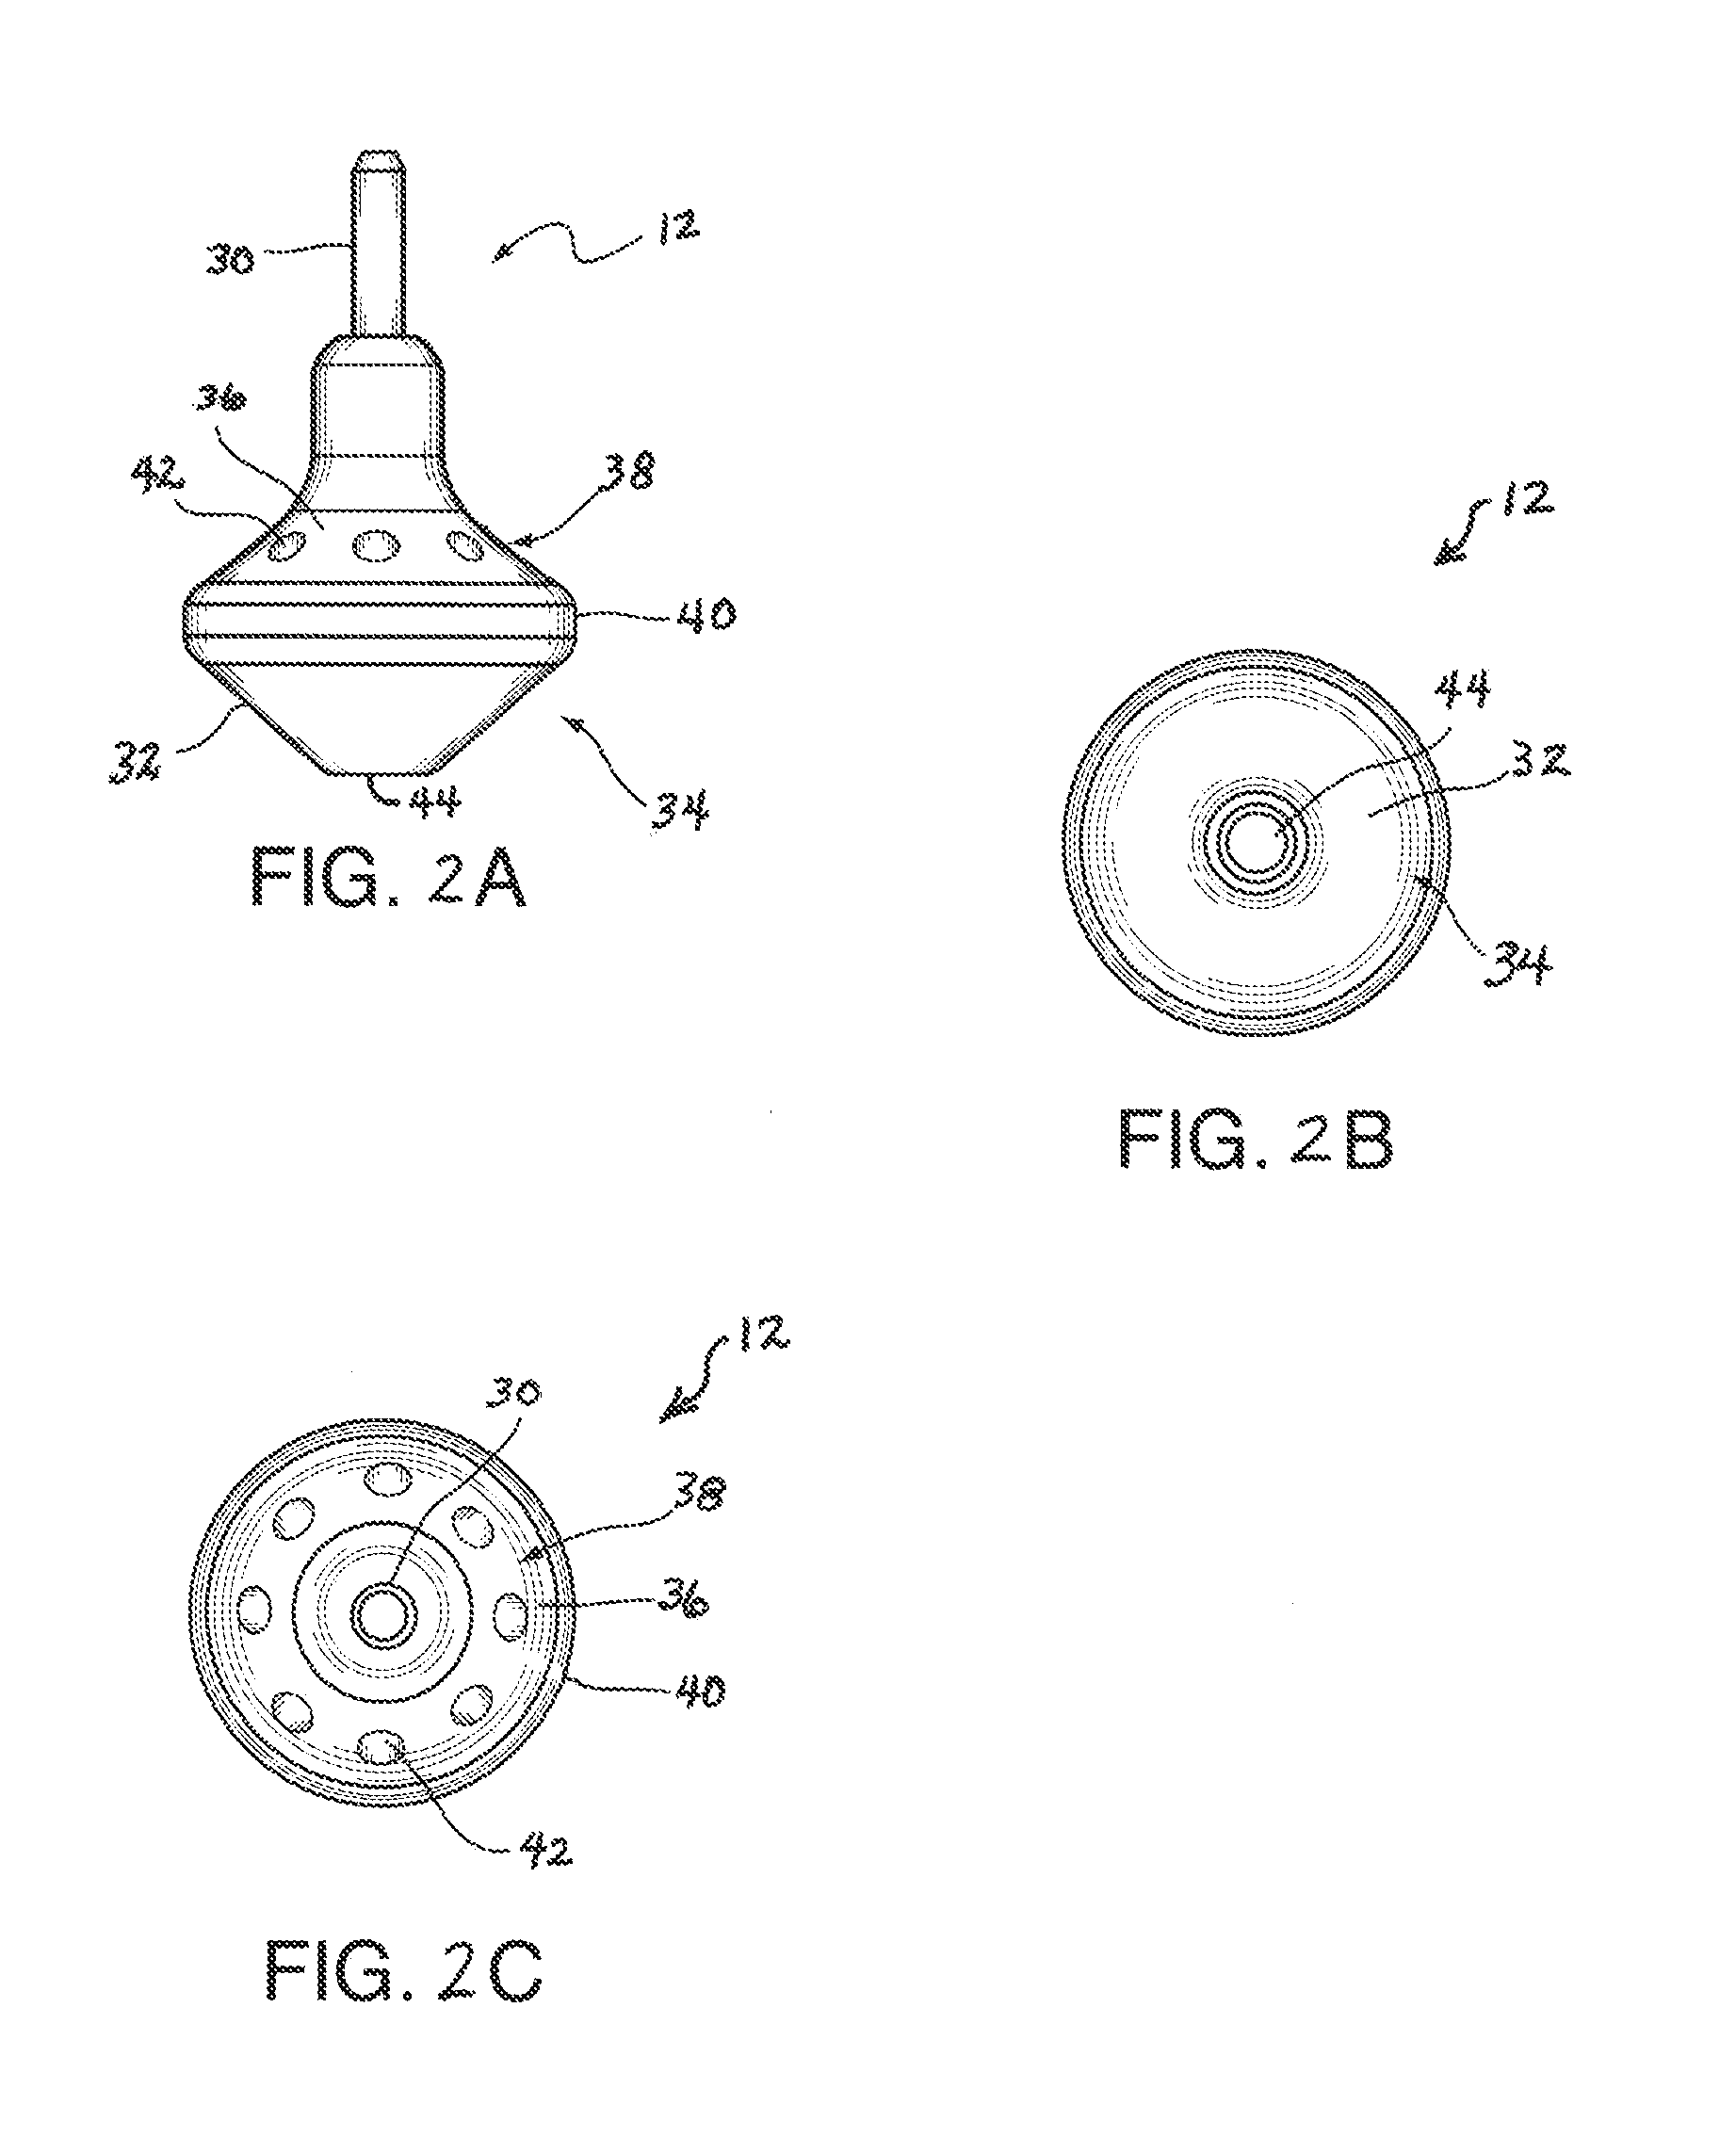 Device and method of using the same for removing a flowable material contained within a vessel or cavity